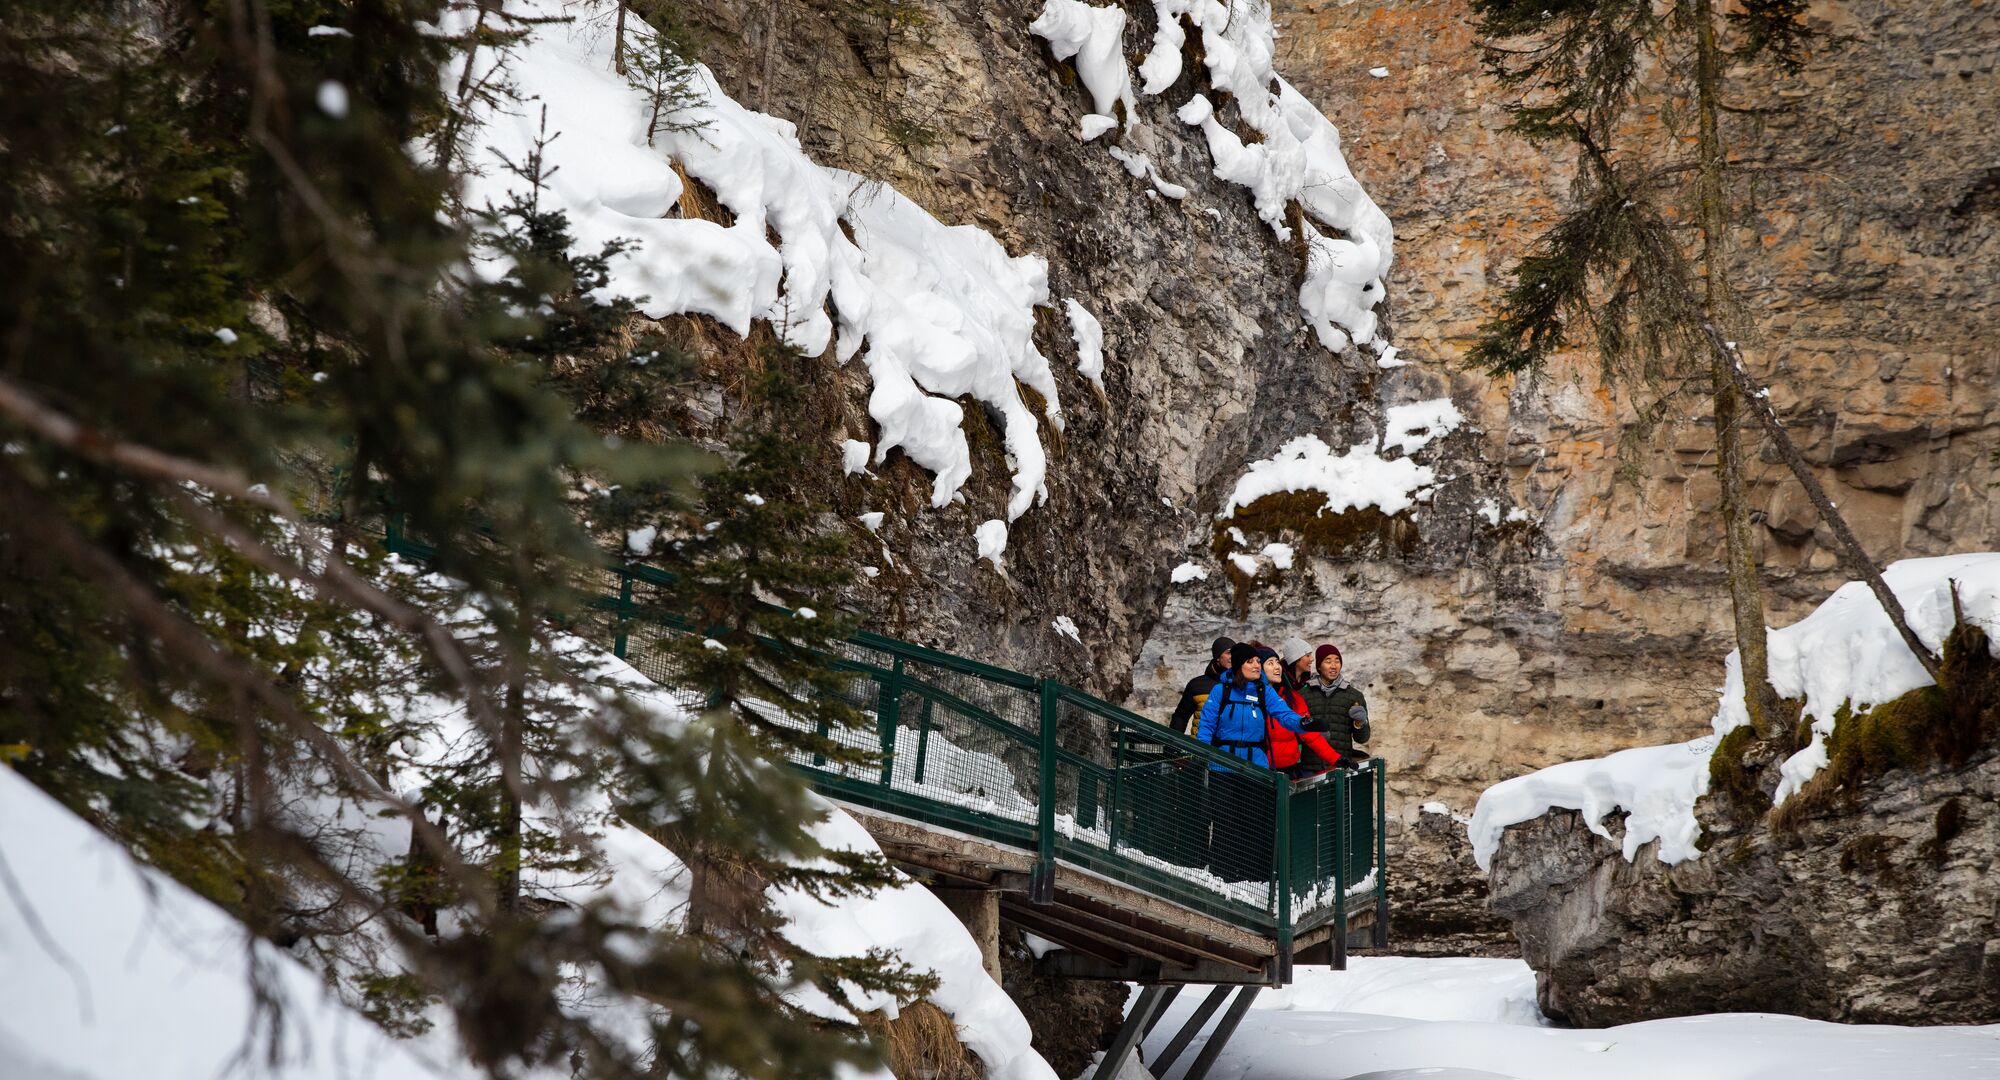 Group of people on a winter ice walk tour at Johnston Canyon in Banff National Park